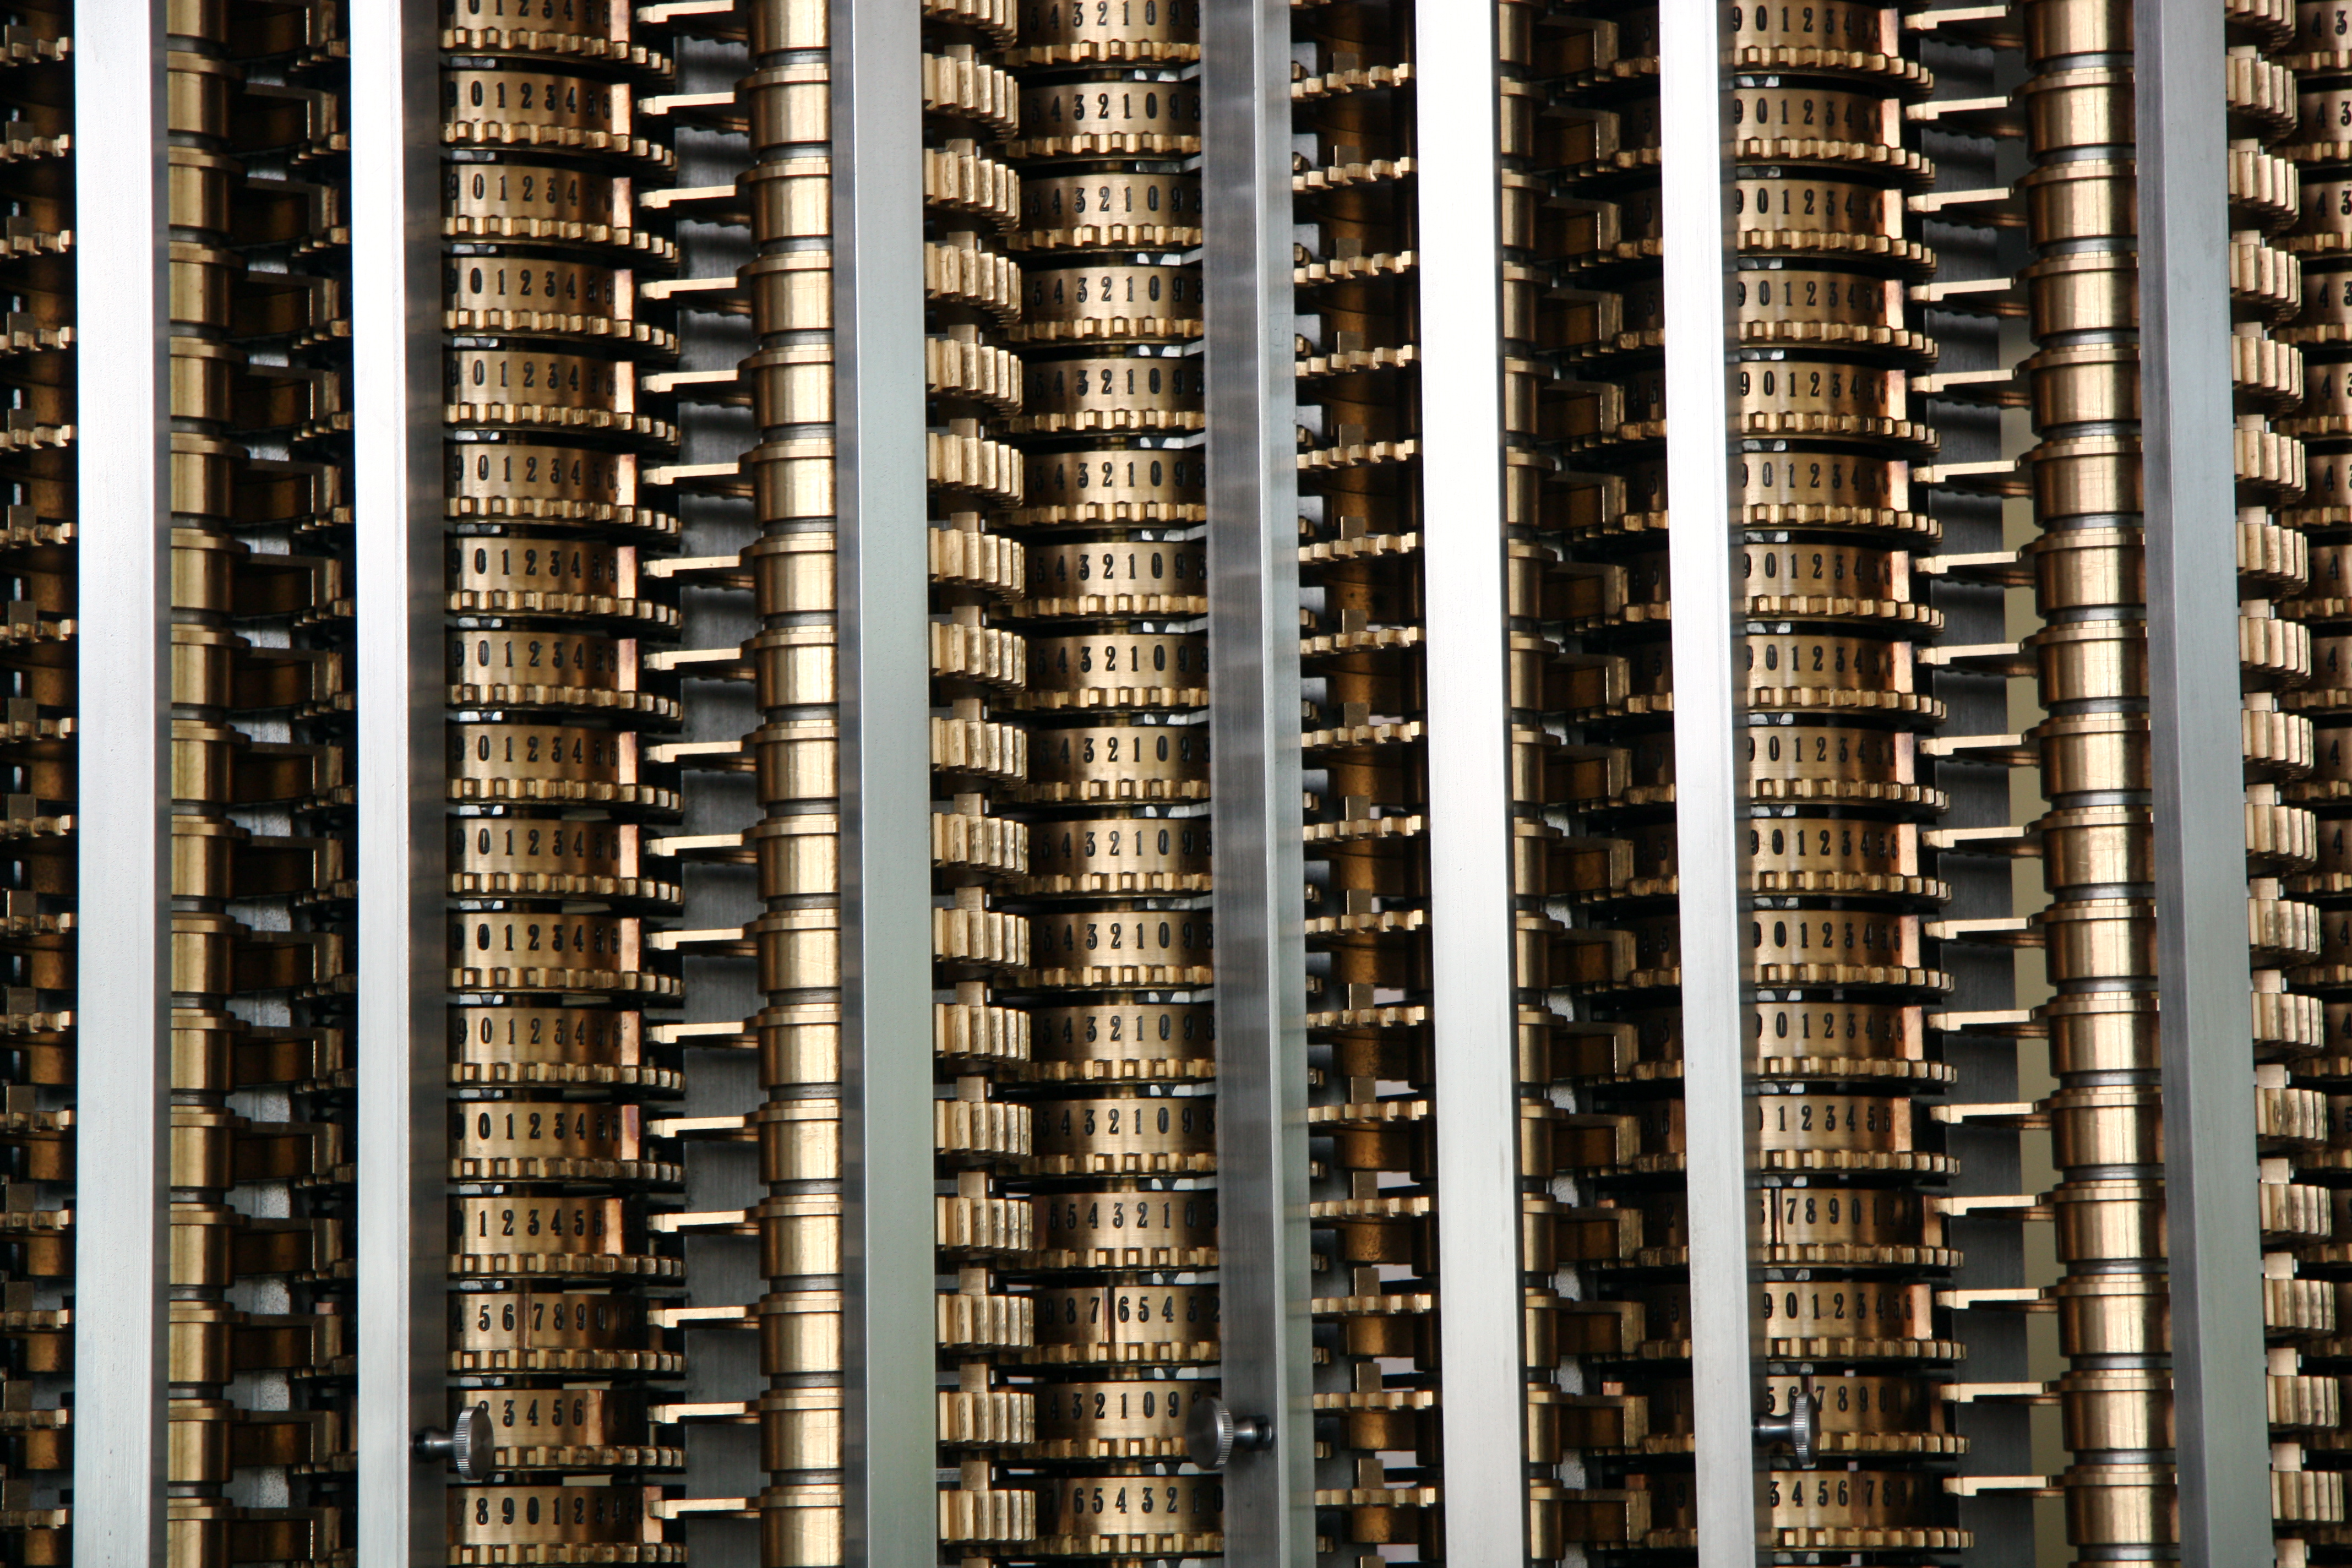 Closeup of the Babbage Difference Engine